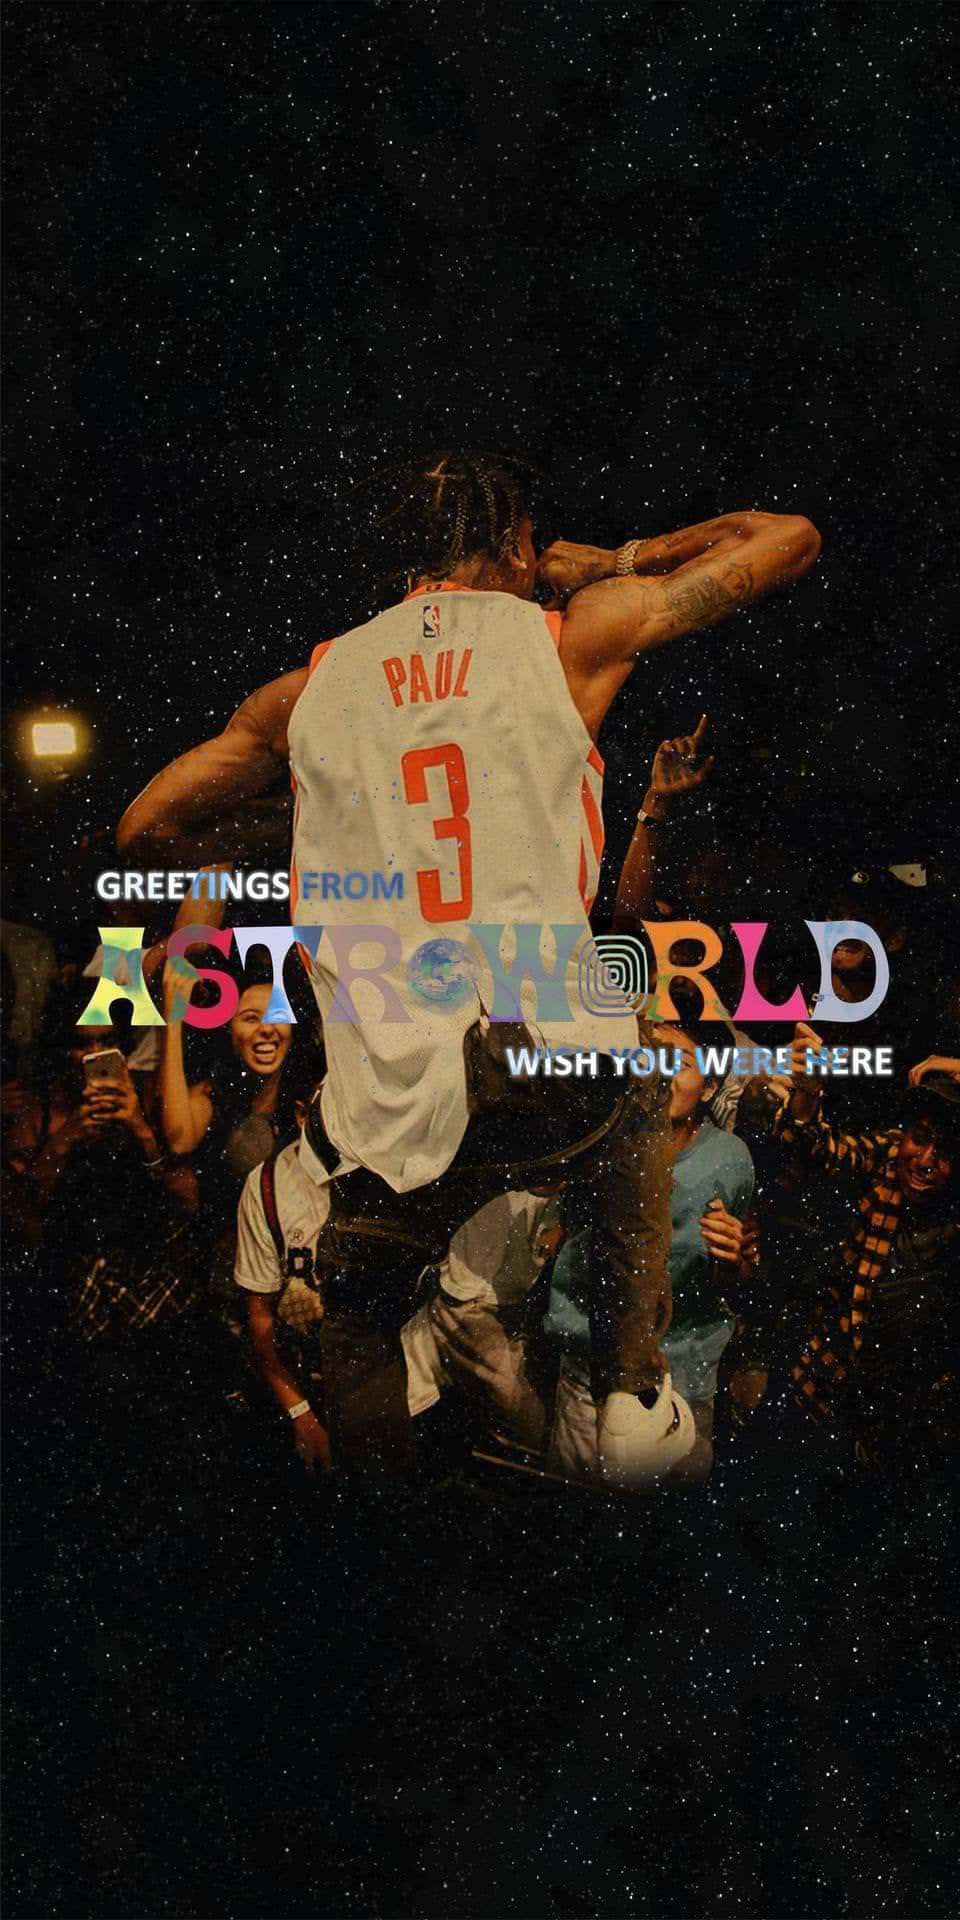 Welcome to Astroworld - the greatest amusement park in the World!